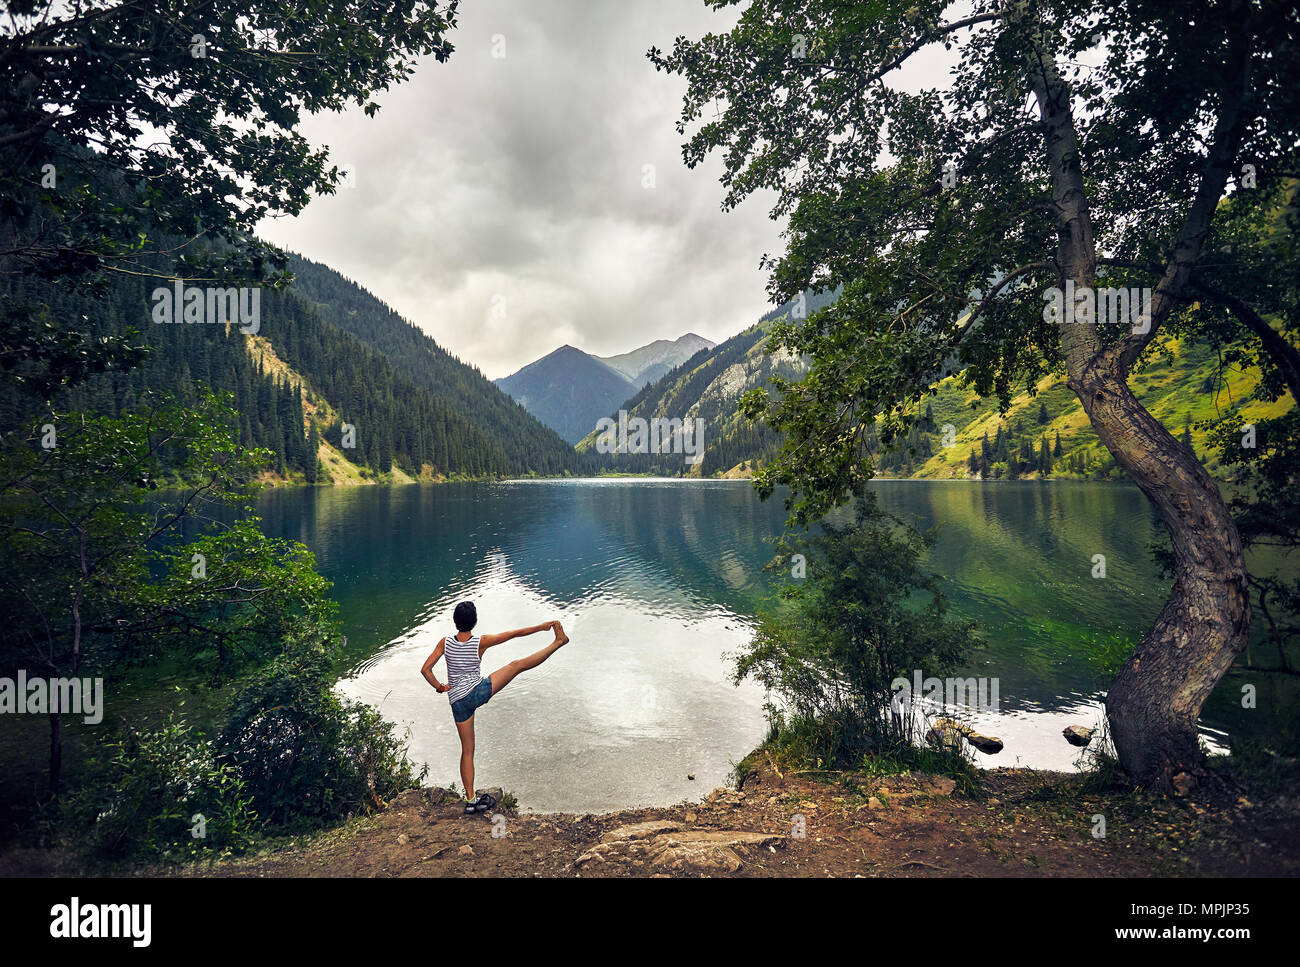 Young woman is practicing yoga balance pose at mountain lake with overcast sky background Stock Photo